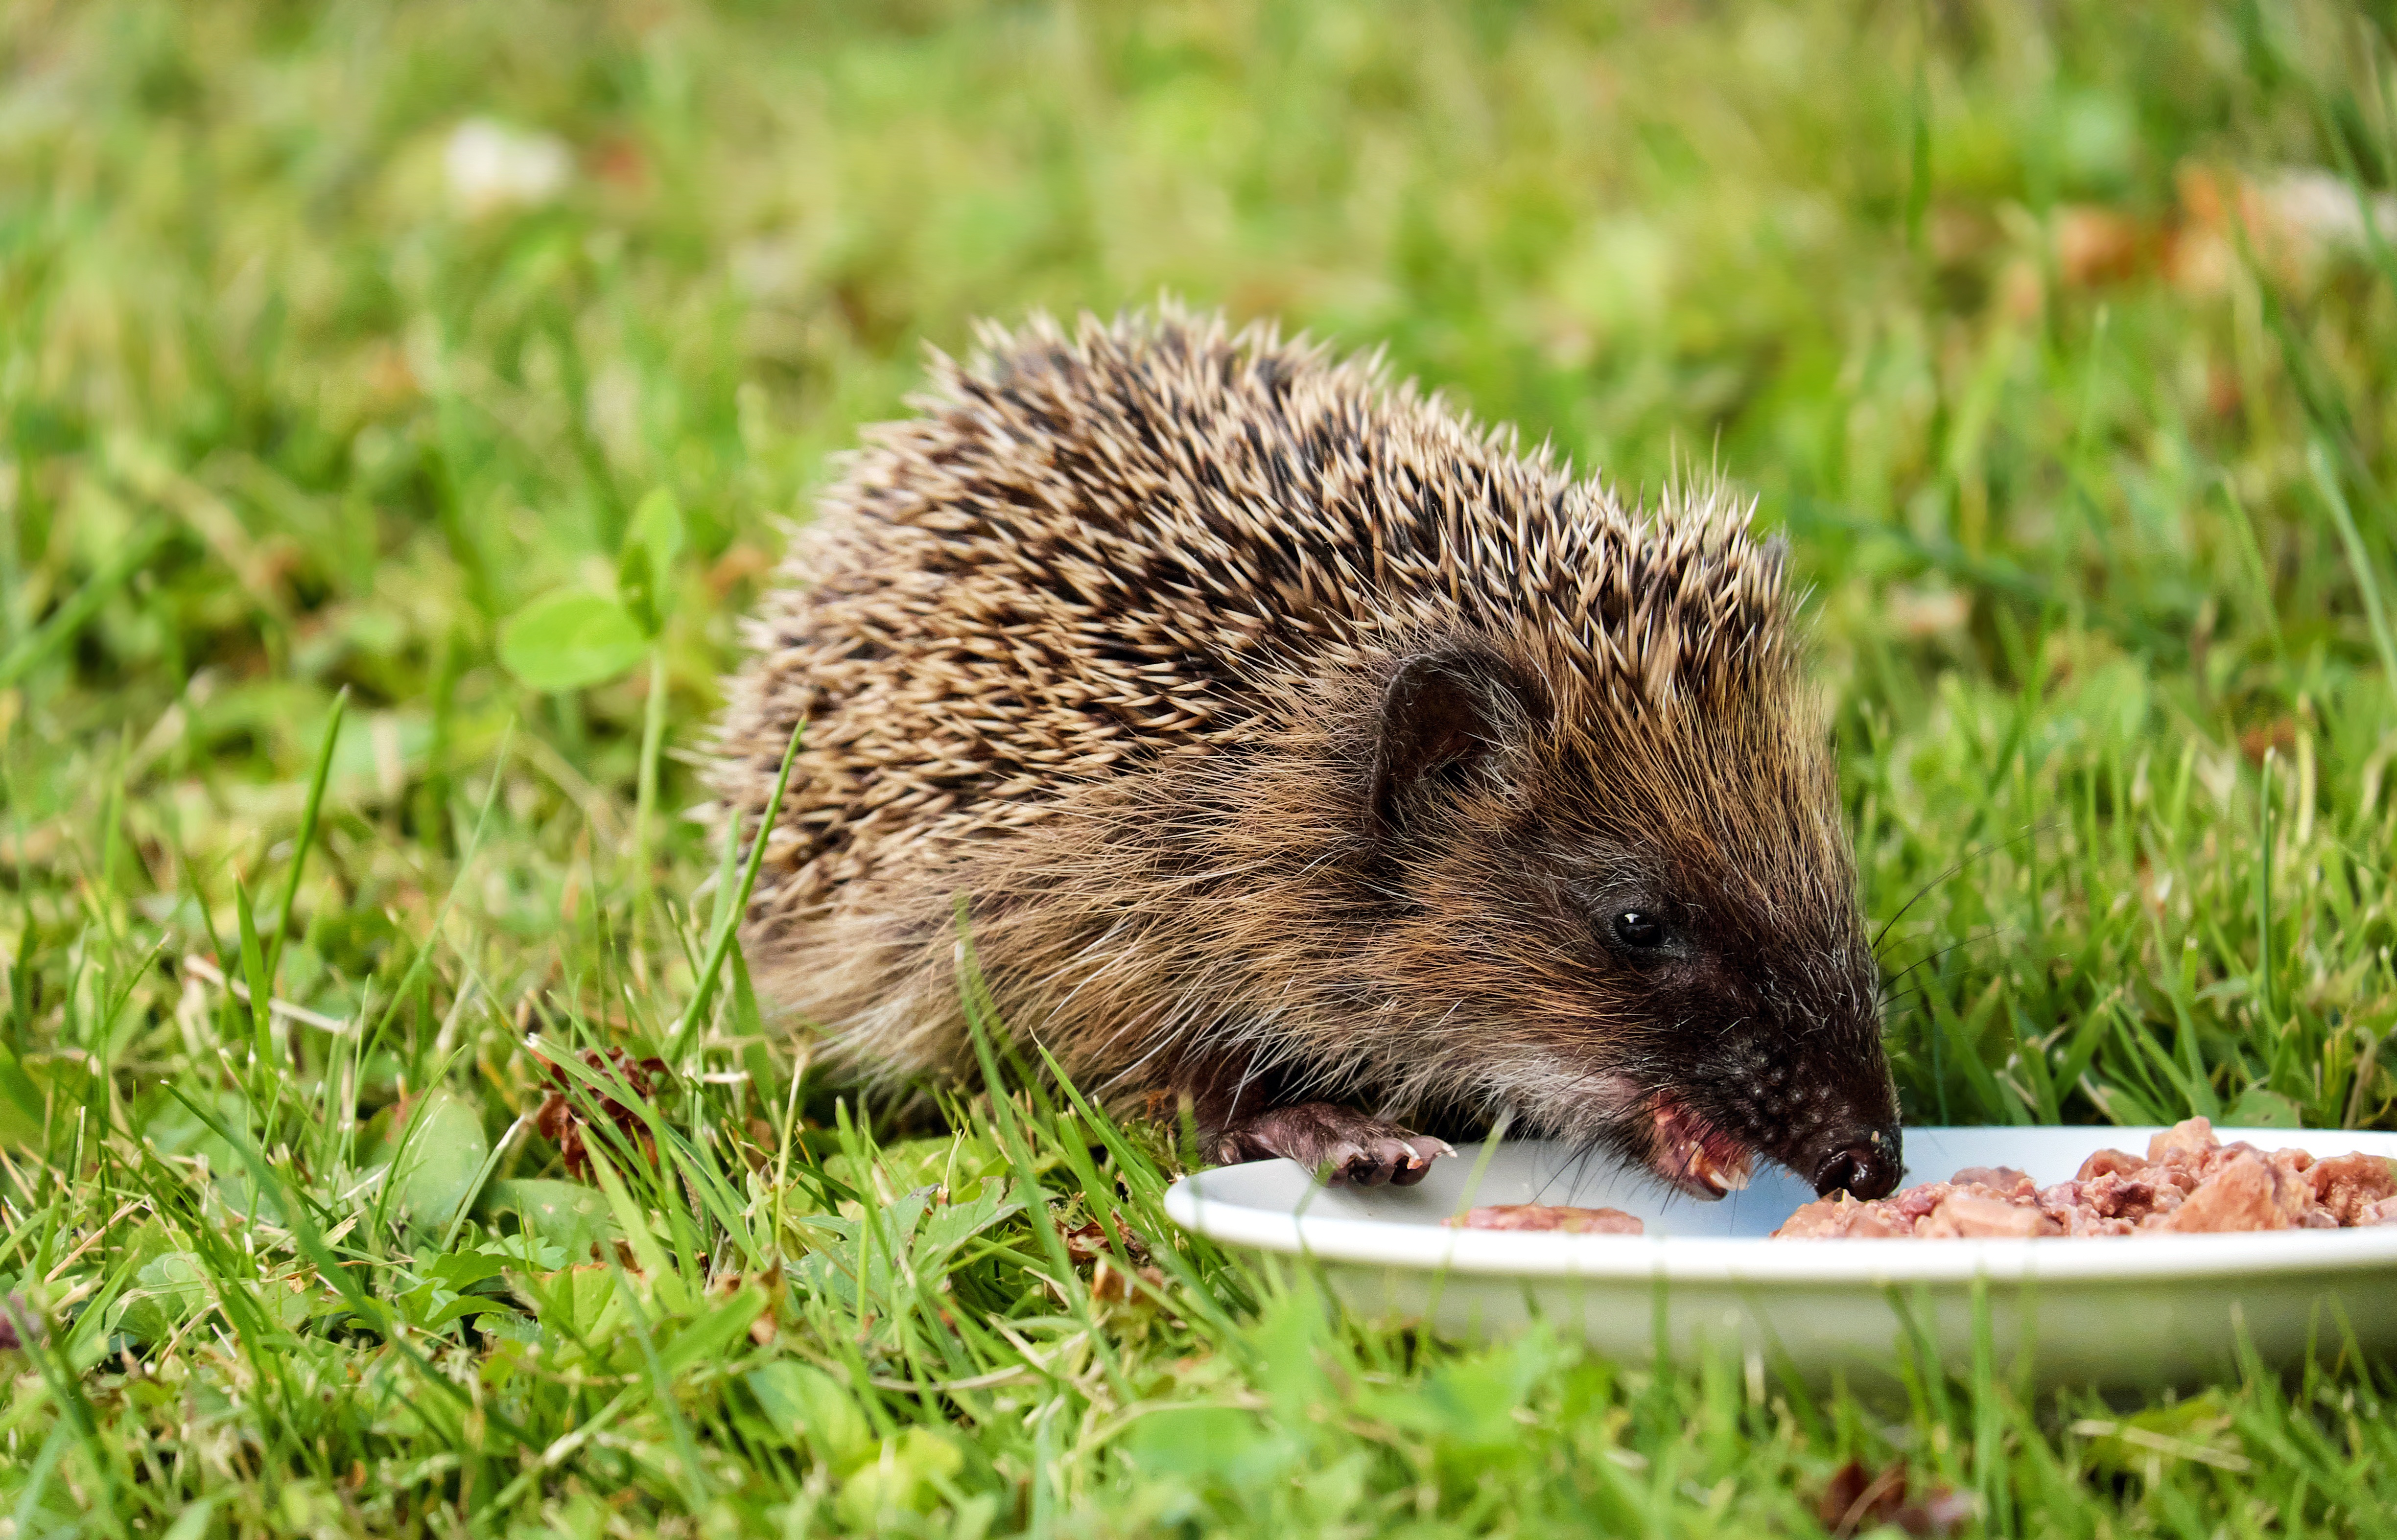 Hedgehog Wallpapers, Pictures, Images